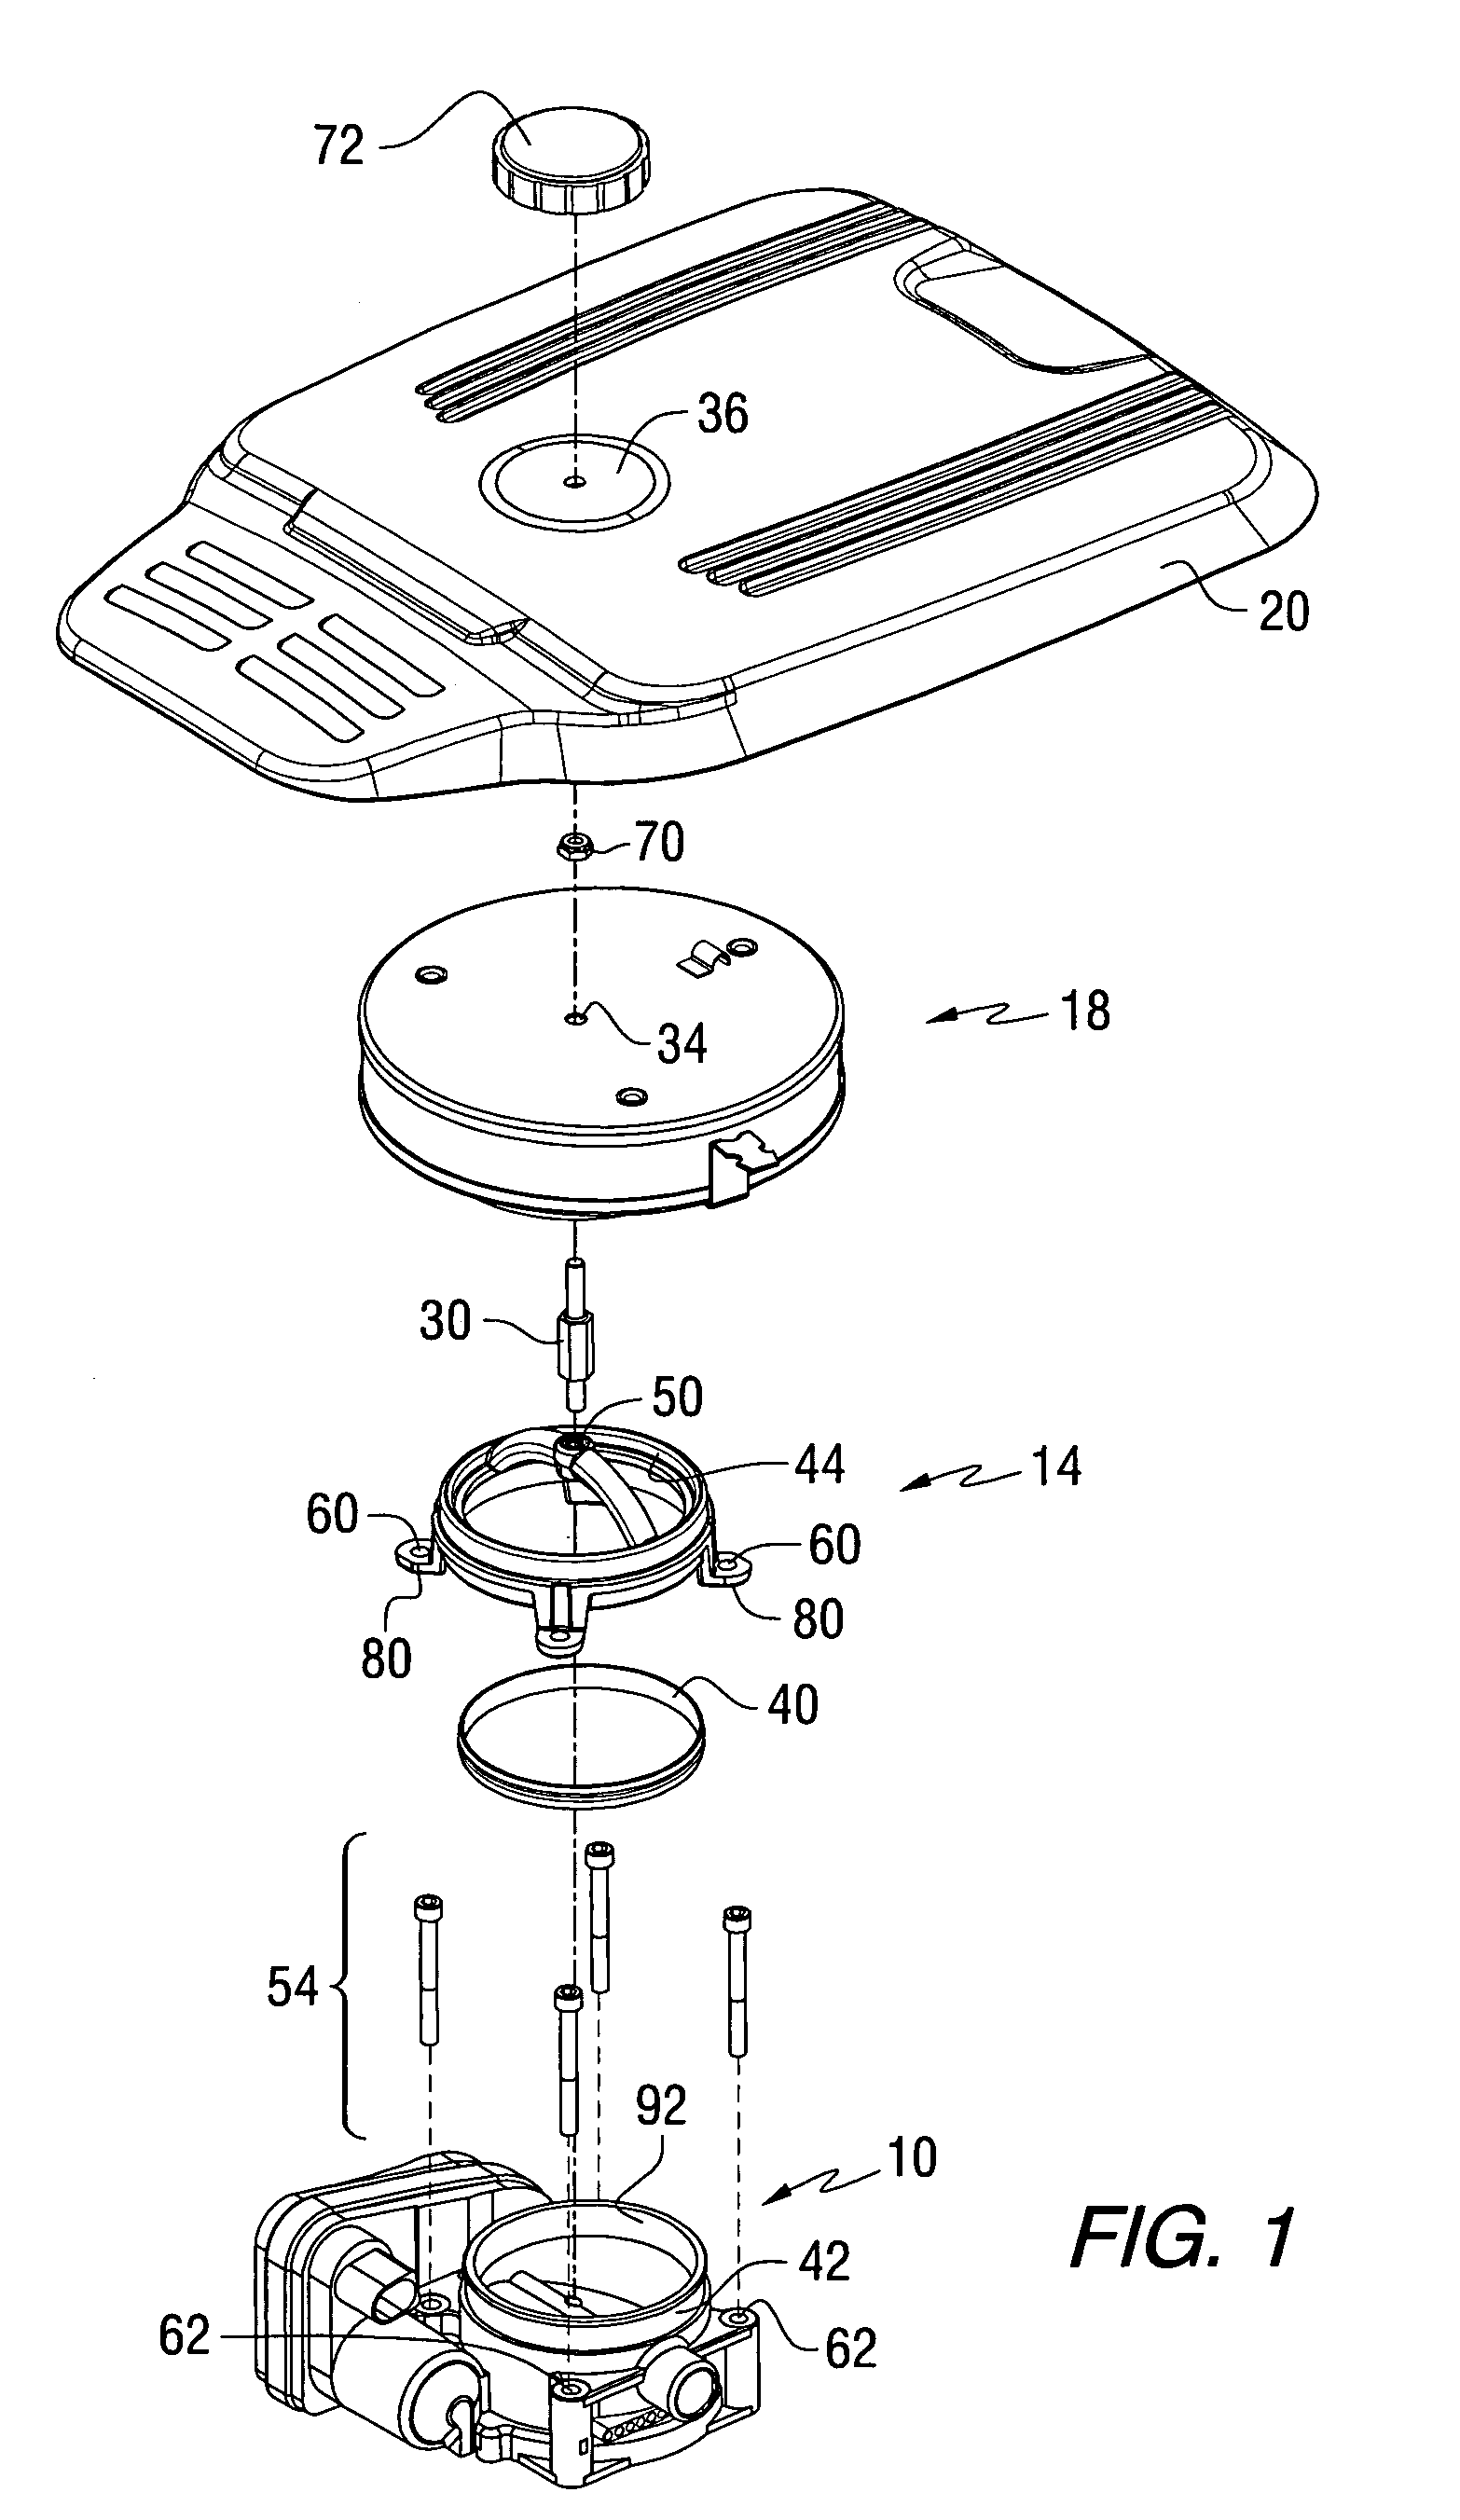 Component mounting system for a marine engine